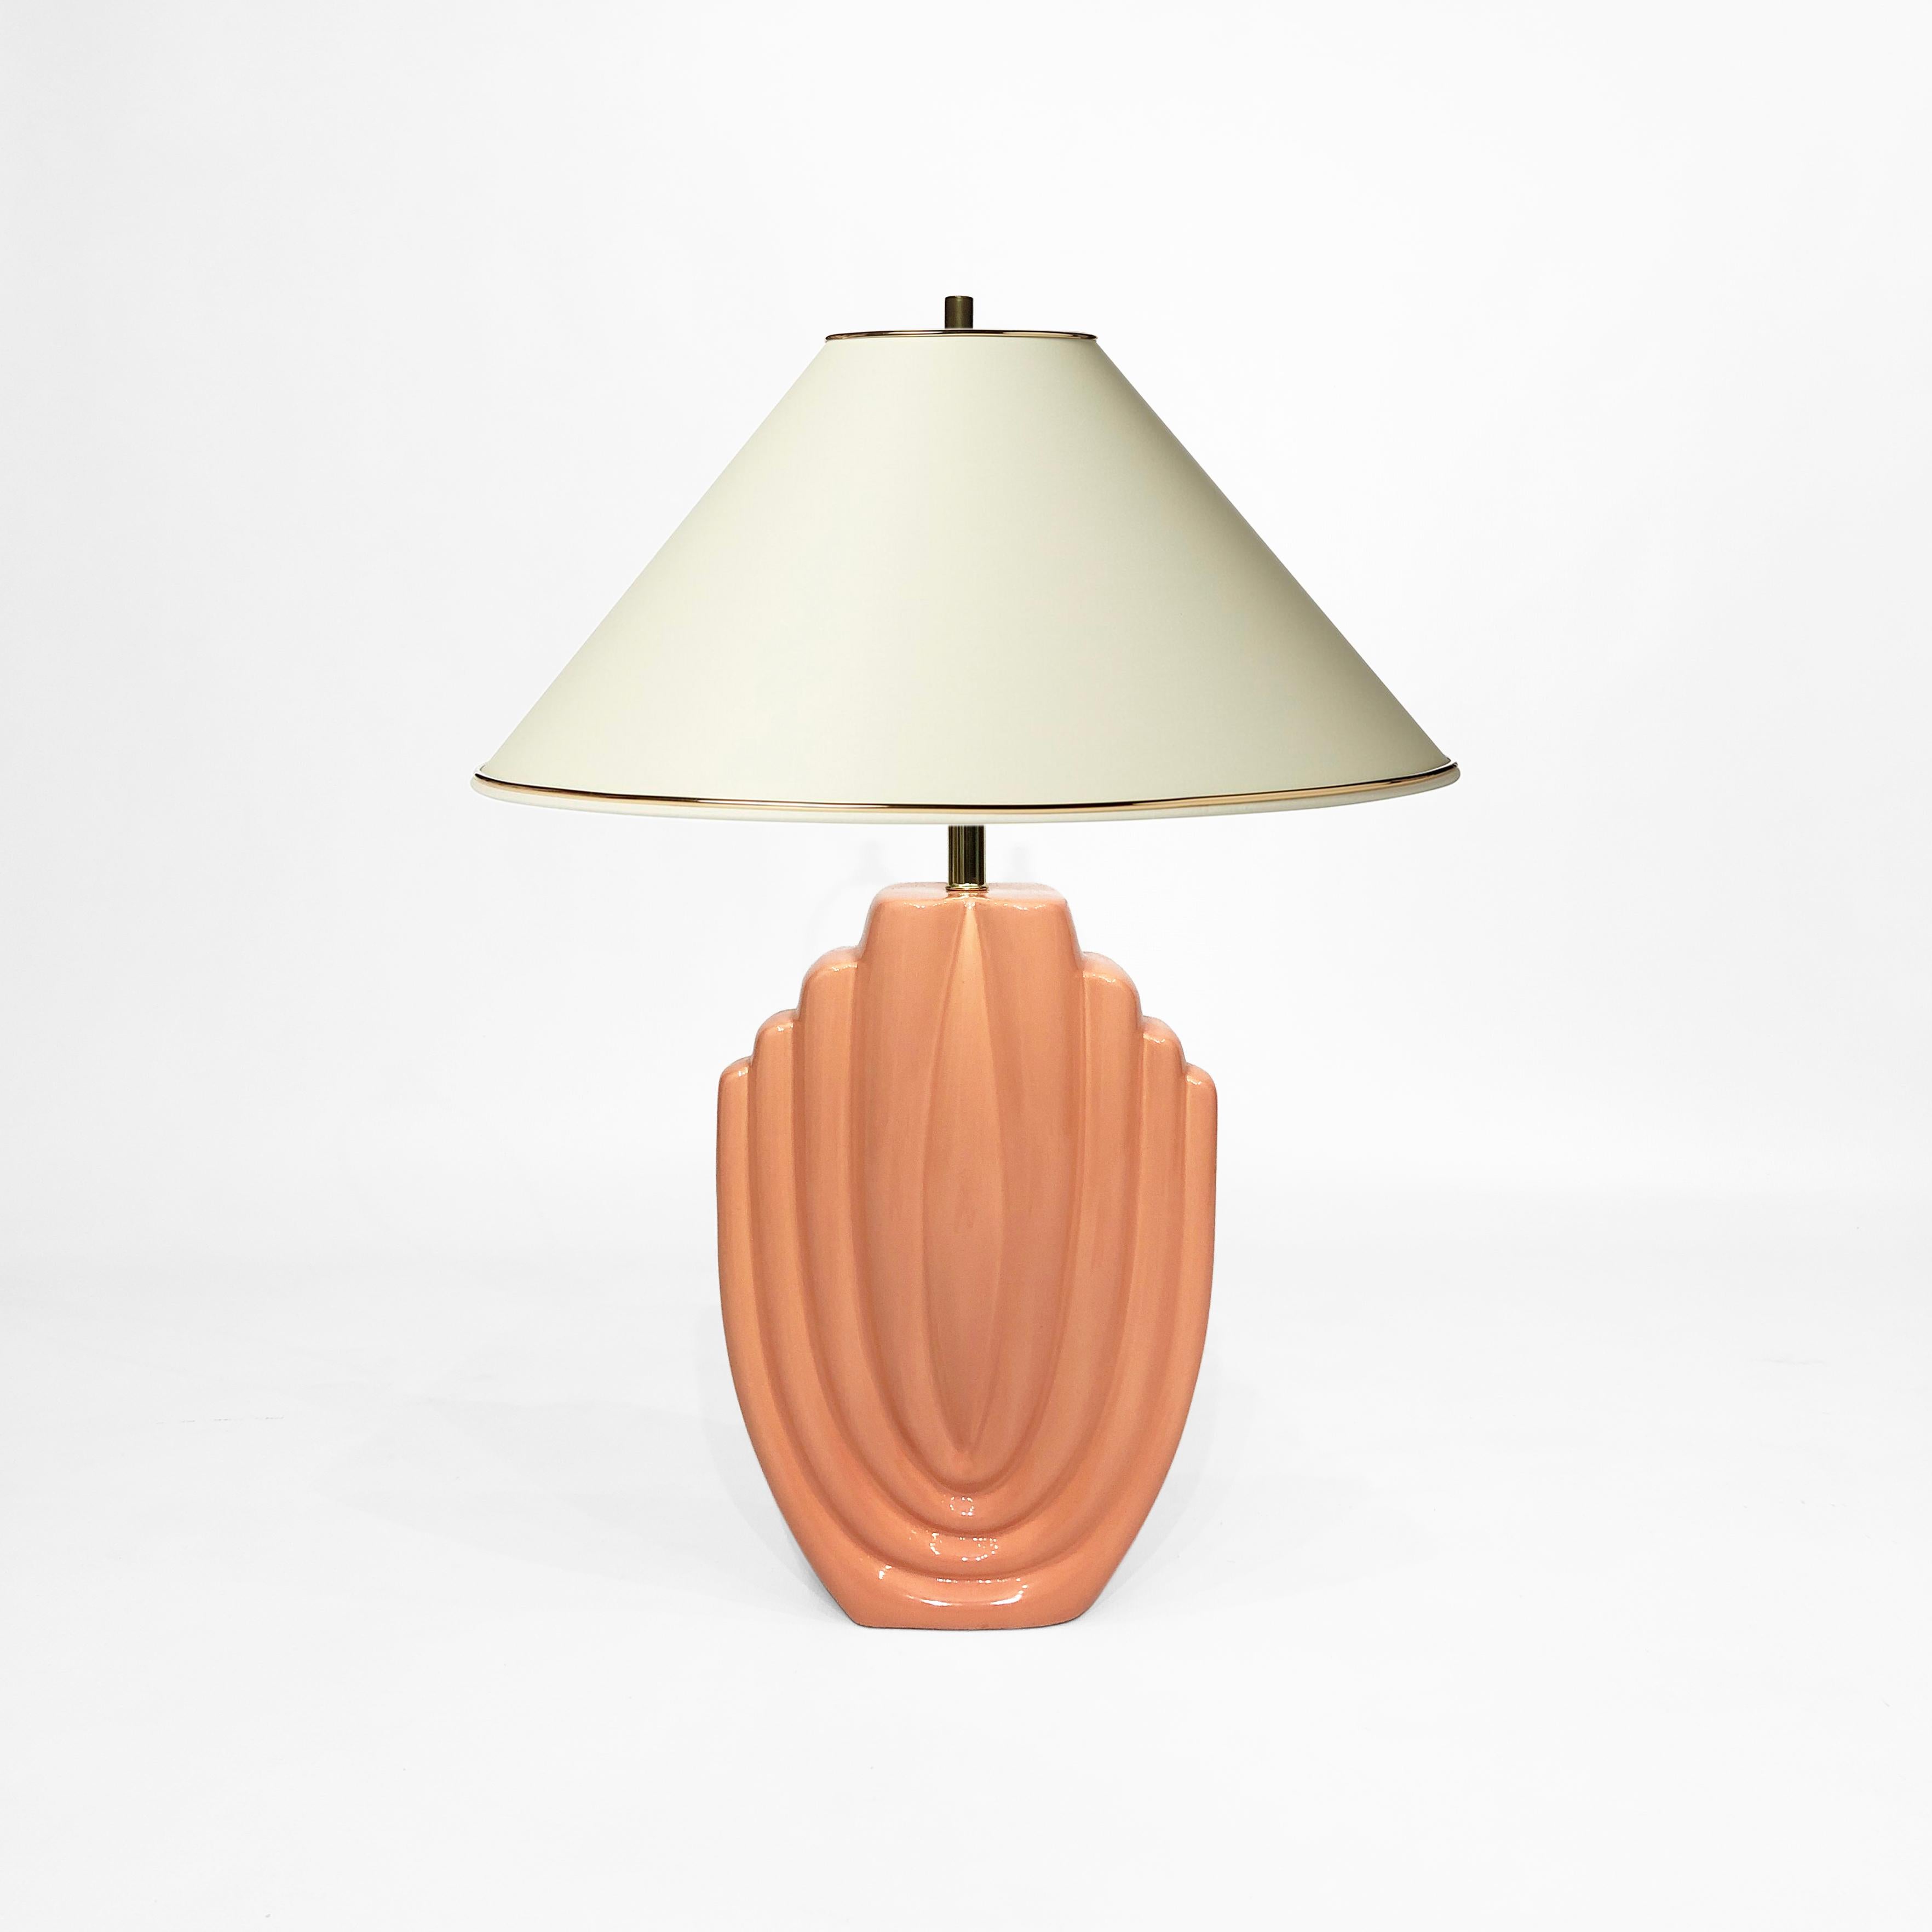 A tall salmon-coloured table lamp, with shades of the Art Deco style, in a wonderful textured ceramic. The nod to the Golden Girls-era 1980s; elegant shell-like pattern; and pastel colouring of the lamp body means it would look perfect in interiors